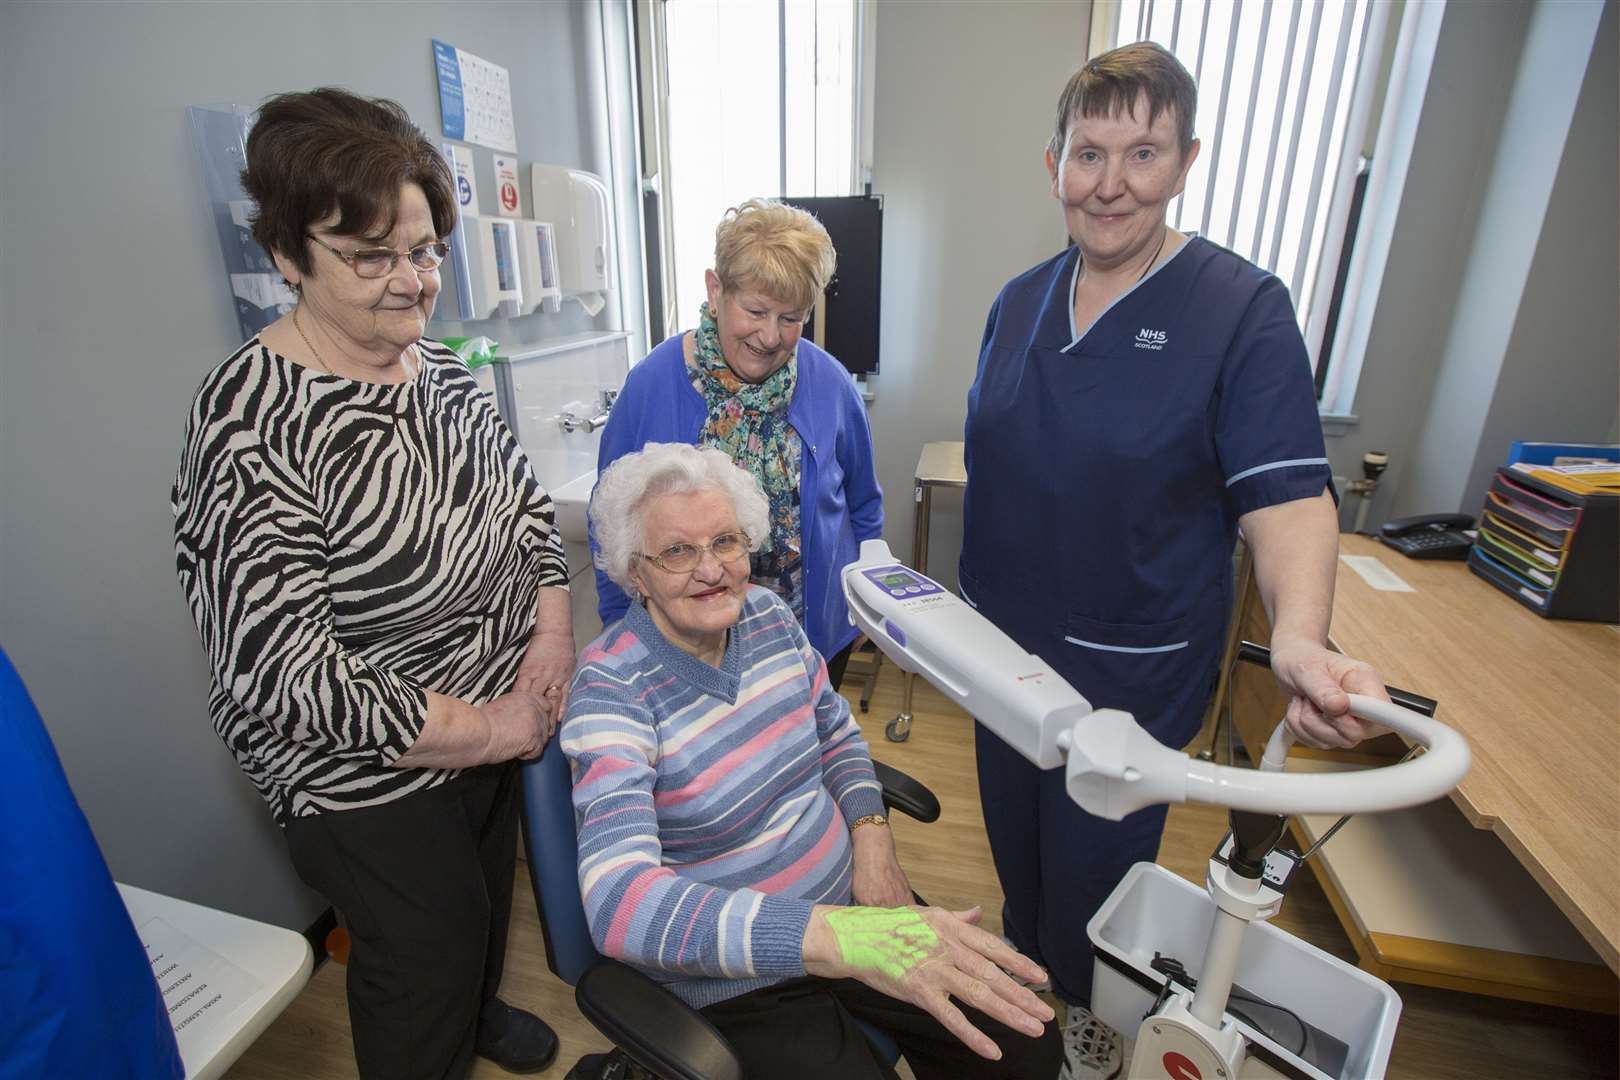 Senior charge nurse Alison Geddes demonstrates the use of the machine on League of Friends of Caithness General Hospital secretary Lottie Shearer, while looking on are chairwoman Annette Sinclair (centre) and treasurer Lorette Mackay (left). Picture: Robert MacDonald/Northern Studios